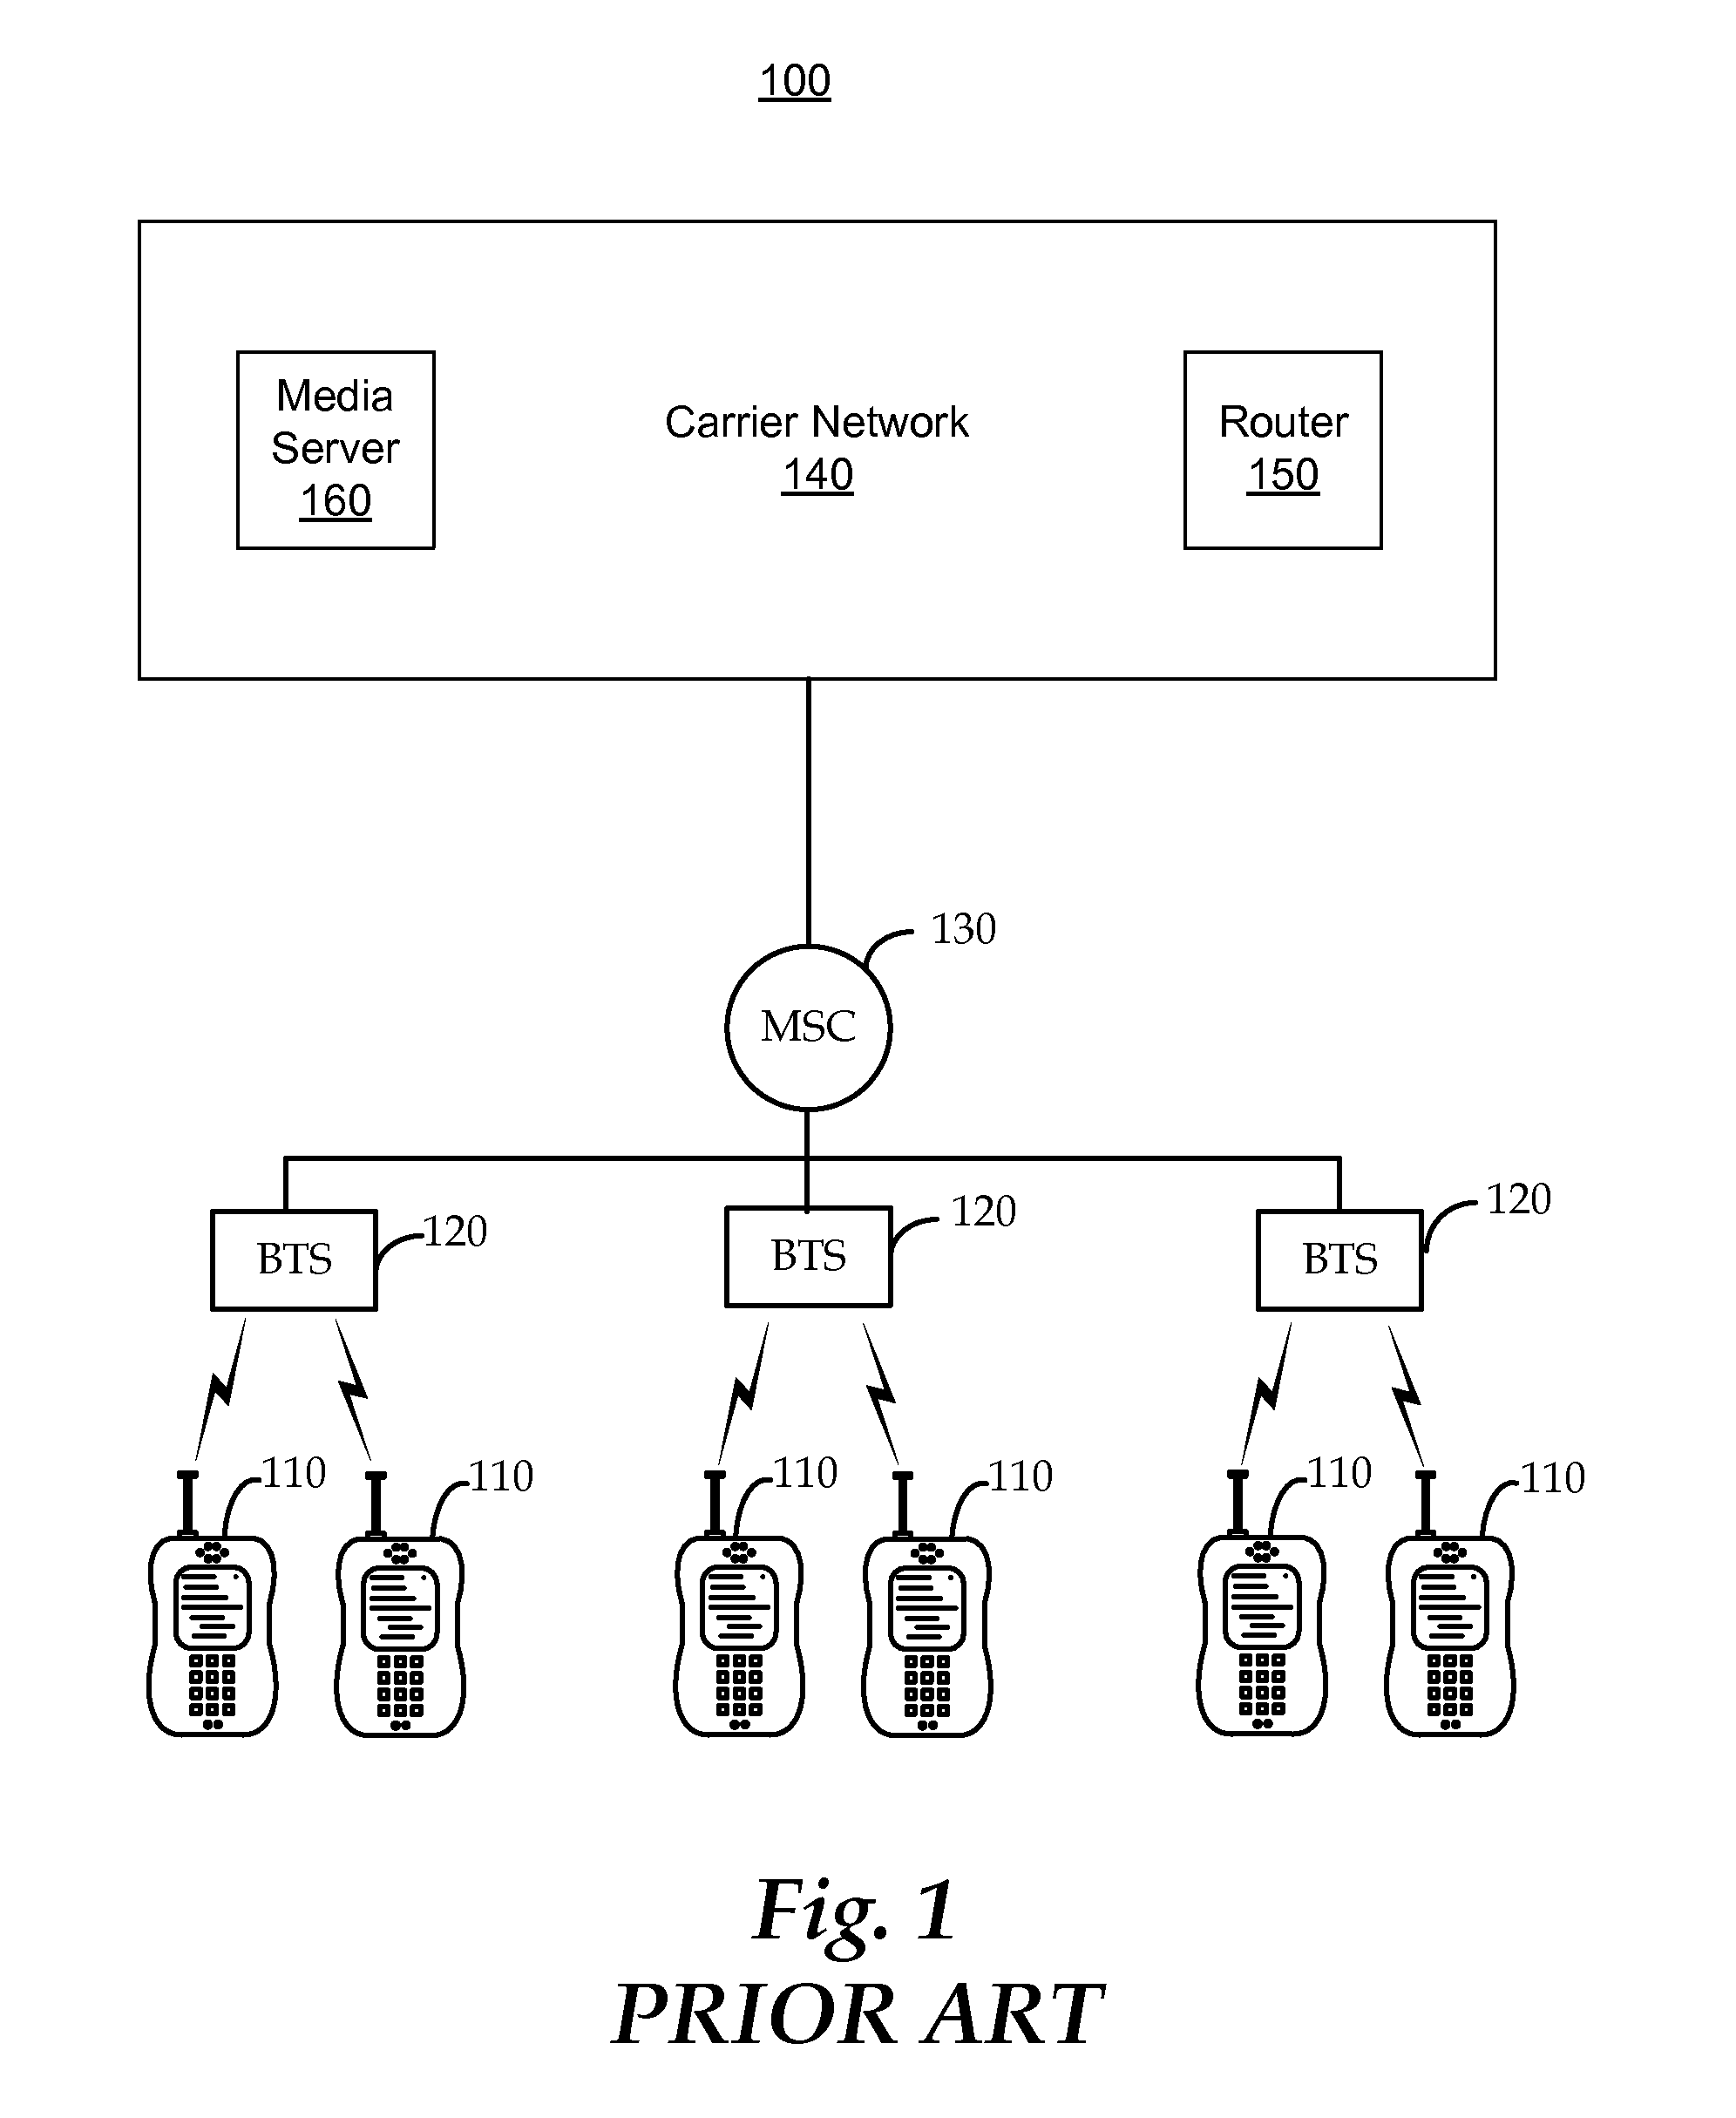 System and method for adaptable multimedia download resulting in efficient airlink usage